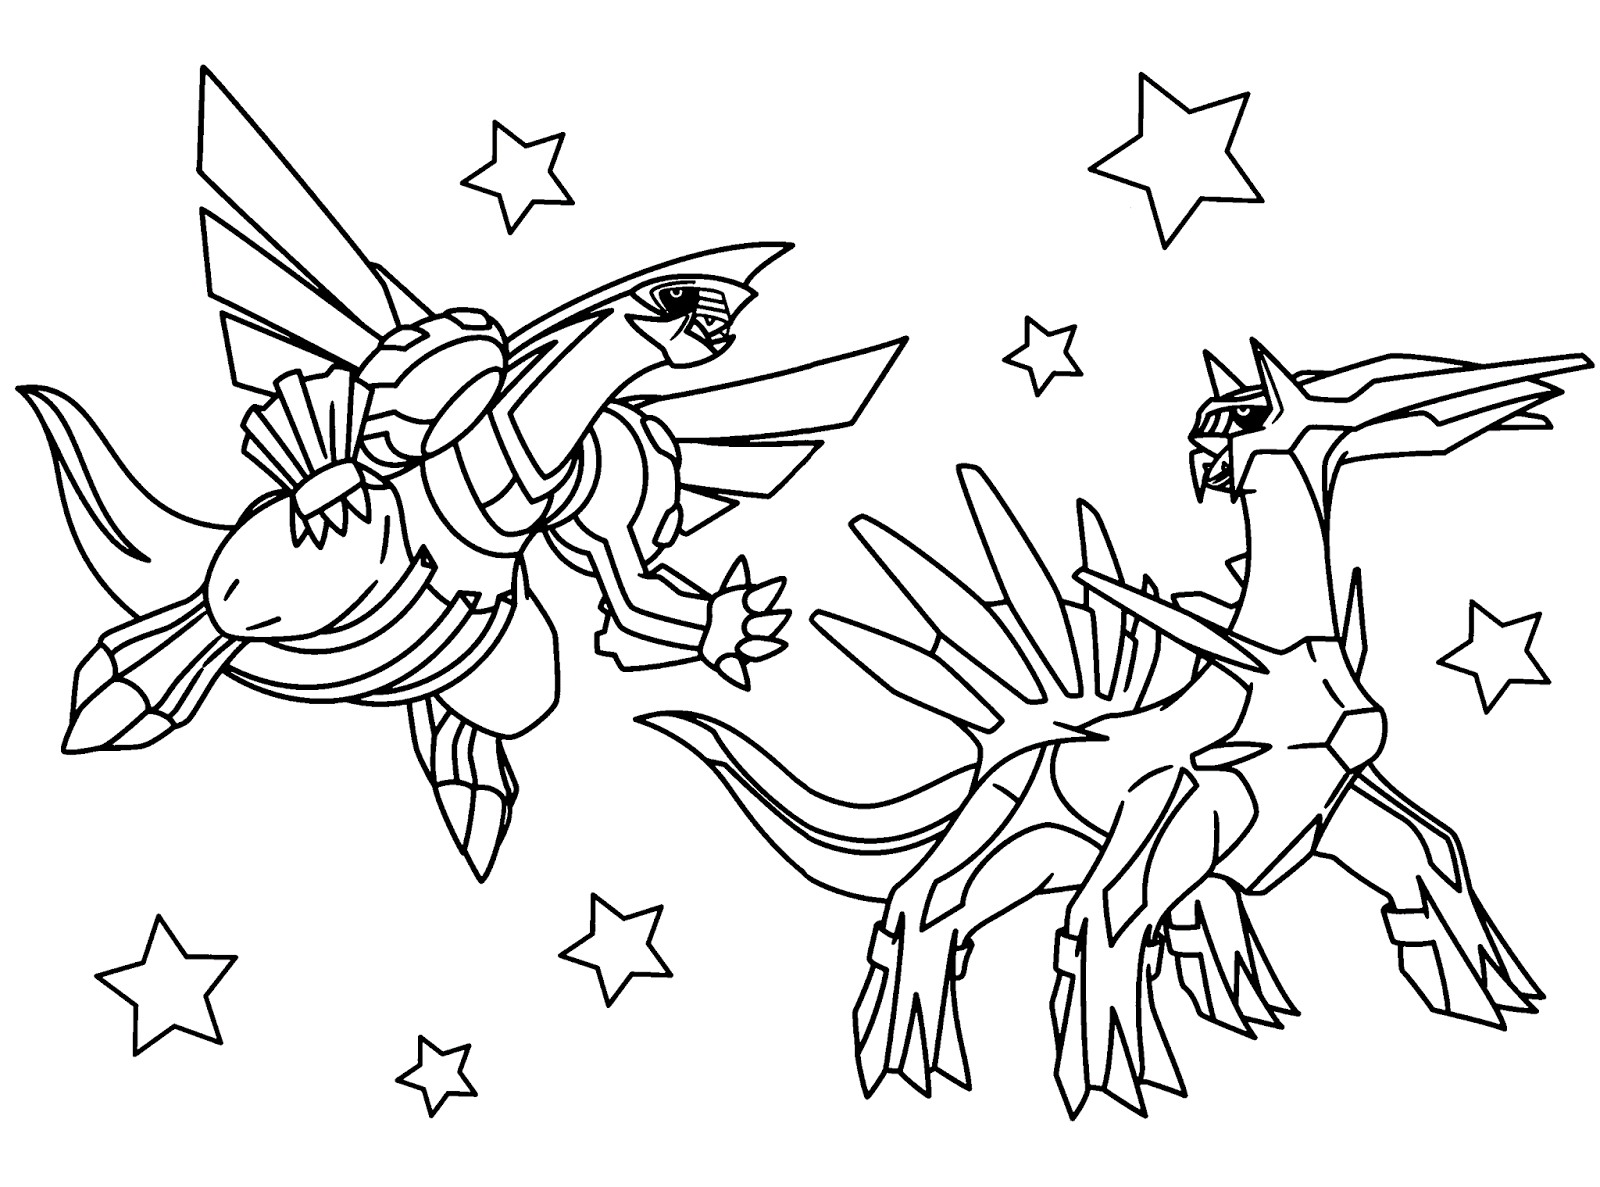 Giratina Coloring Pages 40 Legendary Pokemon Coloring Pages Coloringstar